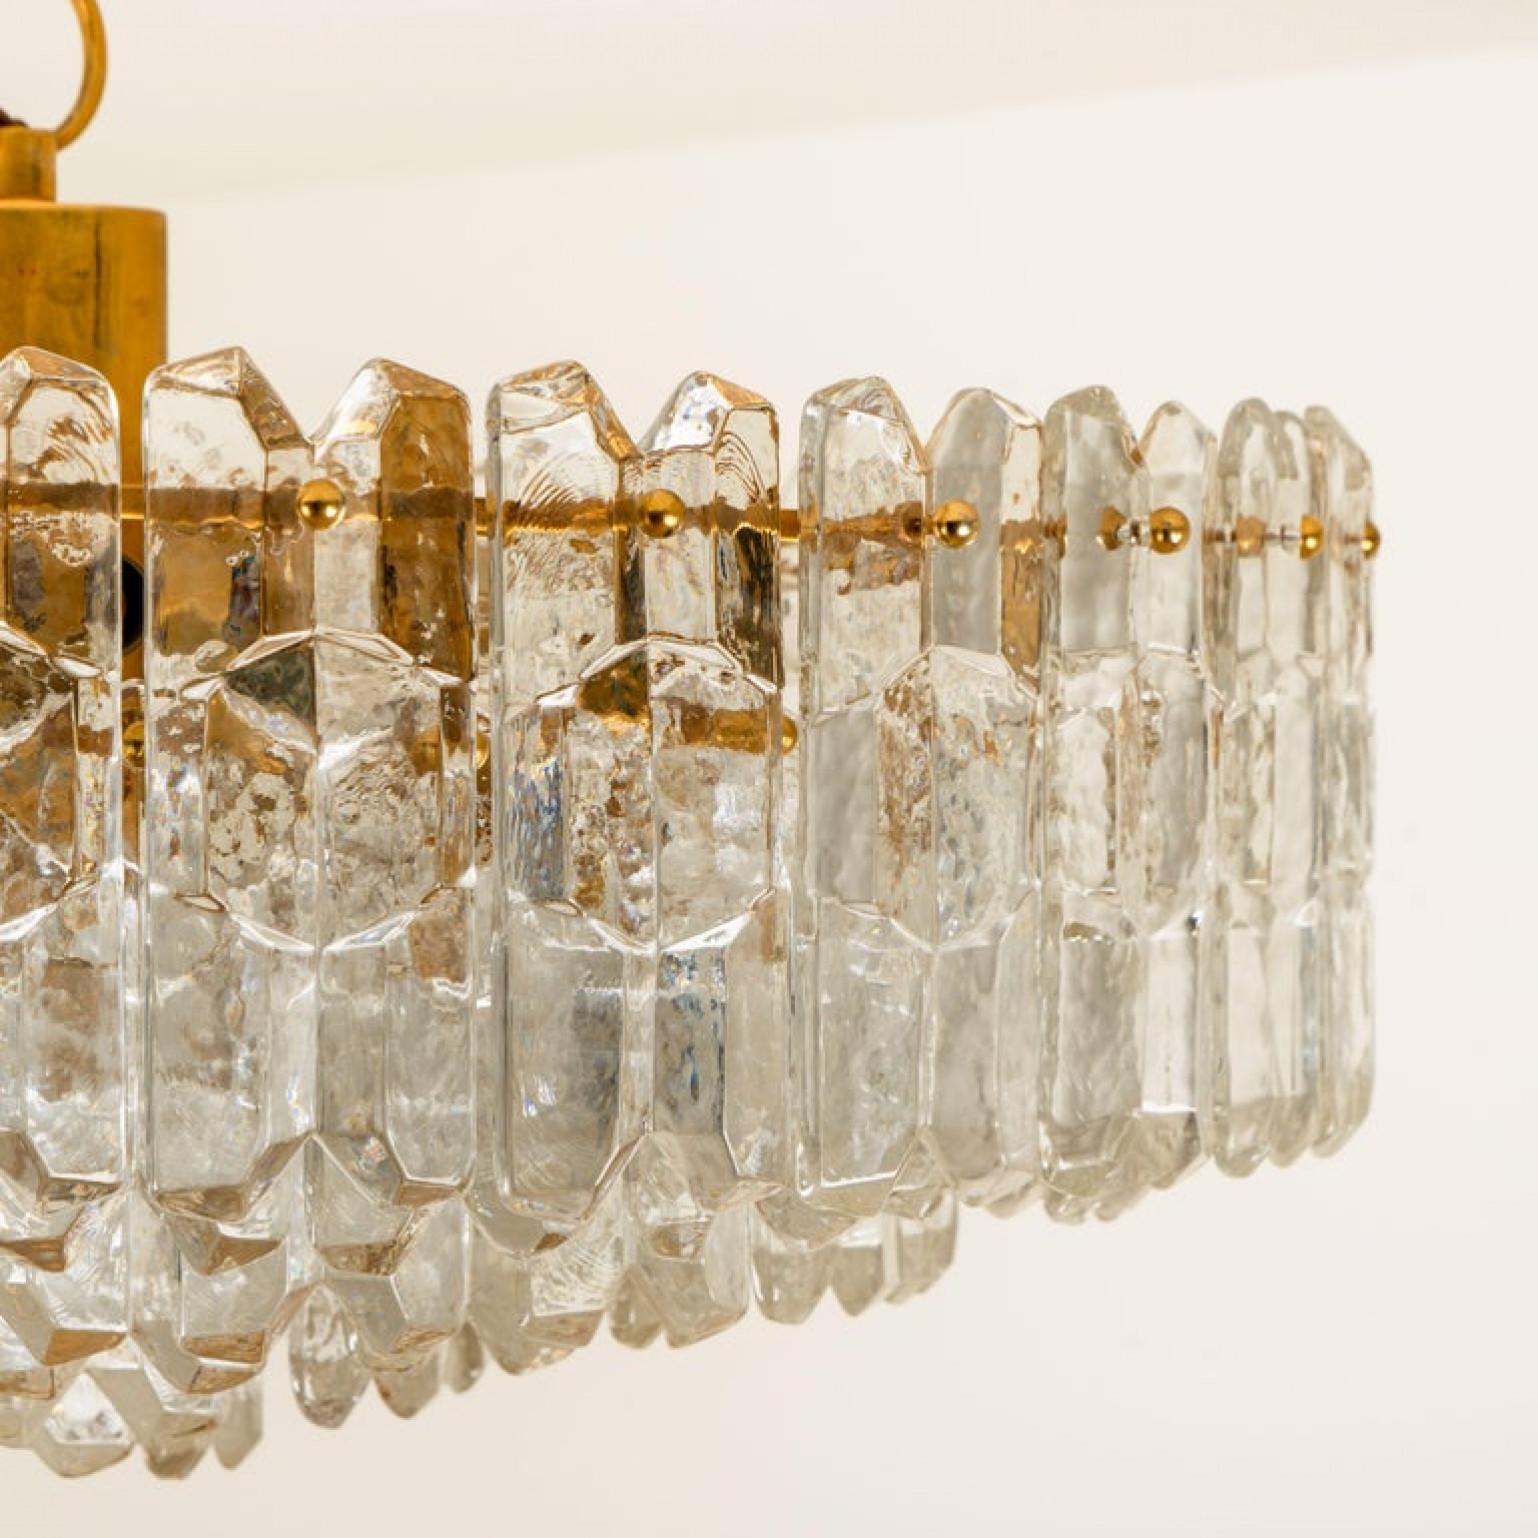 1 of the 2 Huge Kalmar Chandeliers 'Palazzo', Gilded Brass Glass, Austria, 1970s For Sale 7